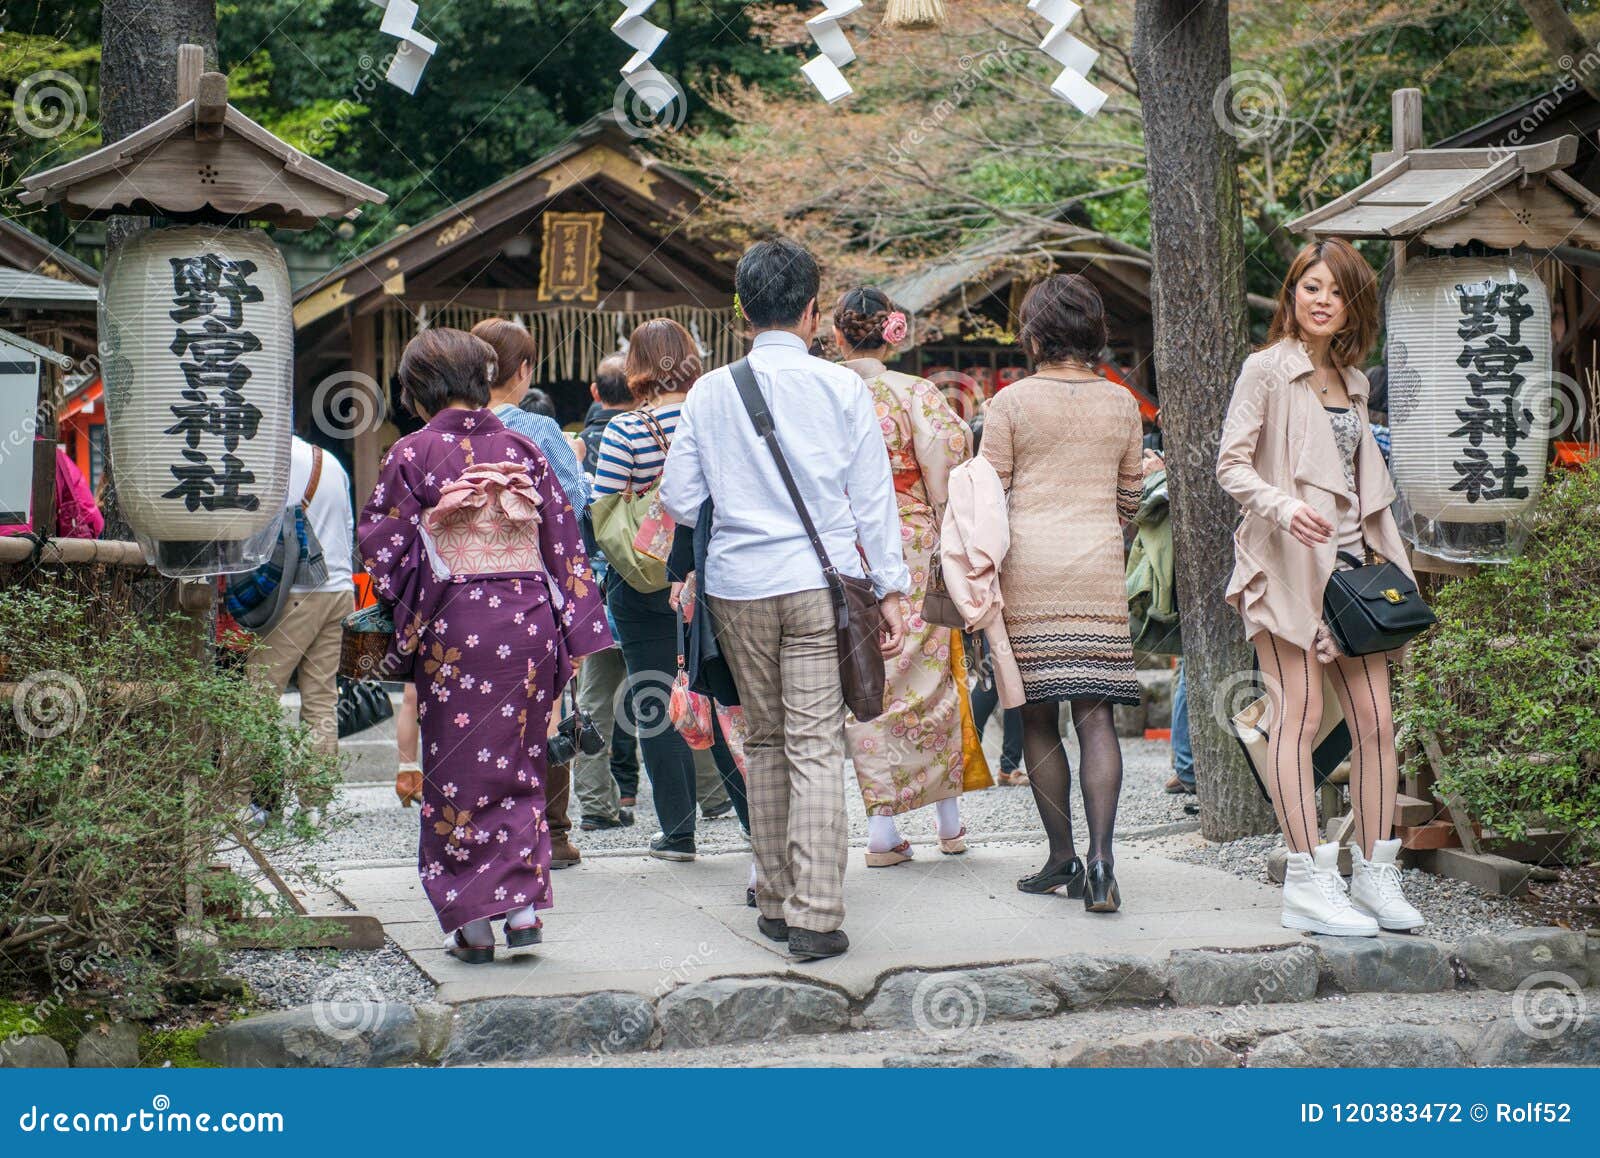 japanese tourists travelling abroad